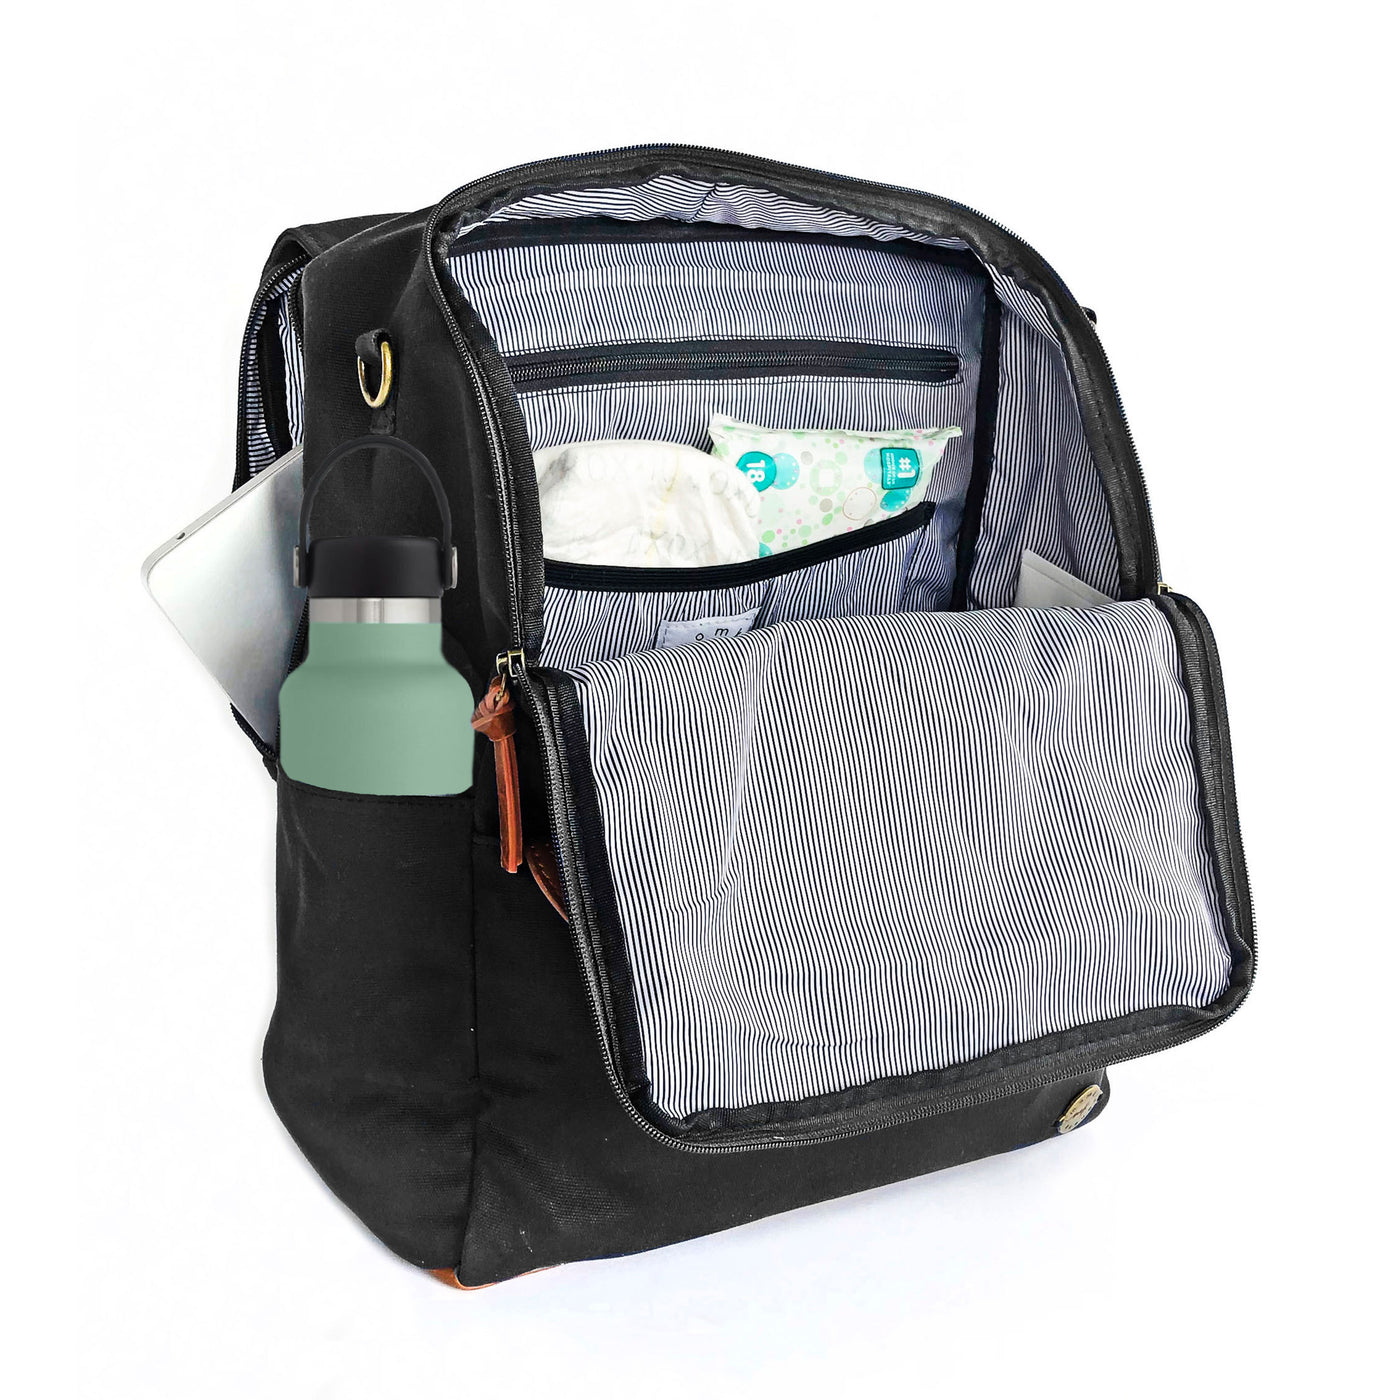 A front-facing 3/4 view of a black waxed canvas backpack with front flap zipped open showing pockets inside, a water bottle in side pocket, and a laptop in separate back compartment. Wipe-clean lining is a thin black and white stripe pattern with black accents. Image shown on a white background.